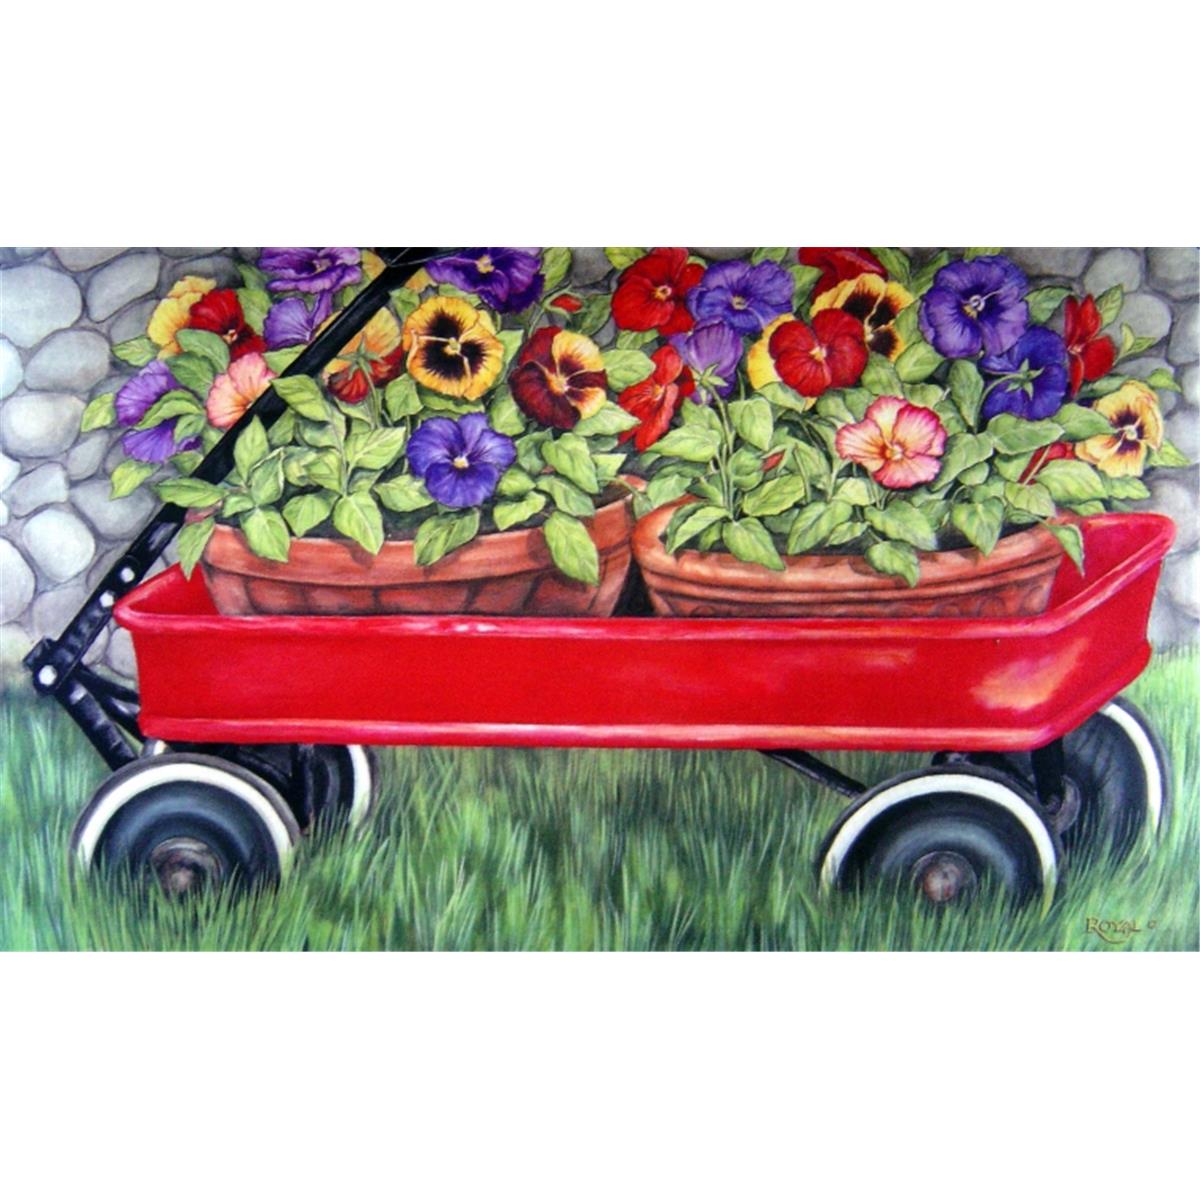 Cpr031 Little Red Wagon Doormat Rug, White - 18 X 30 In.